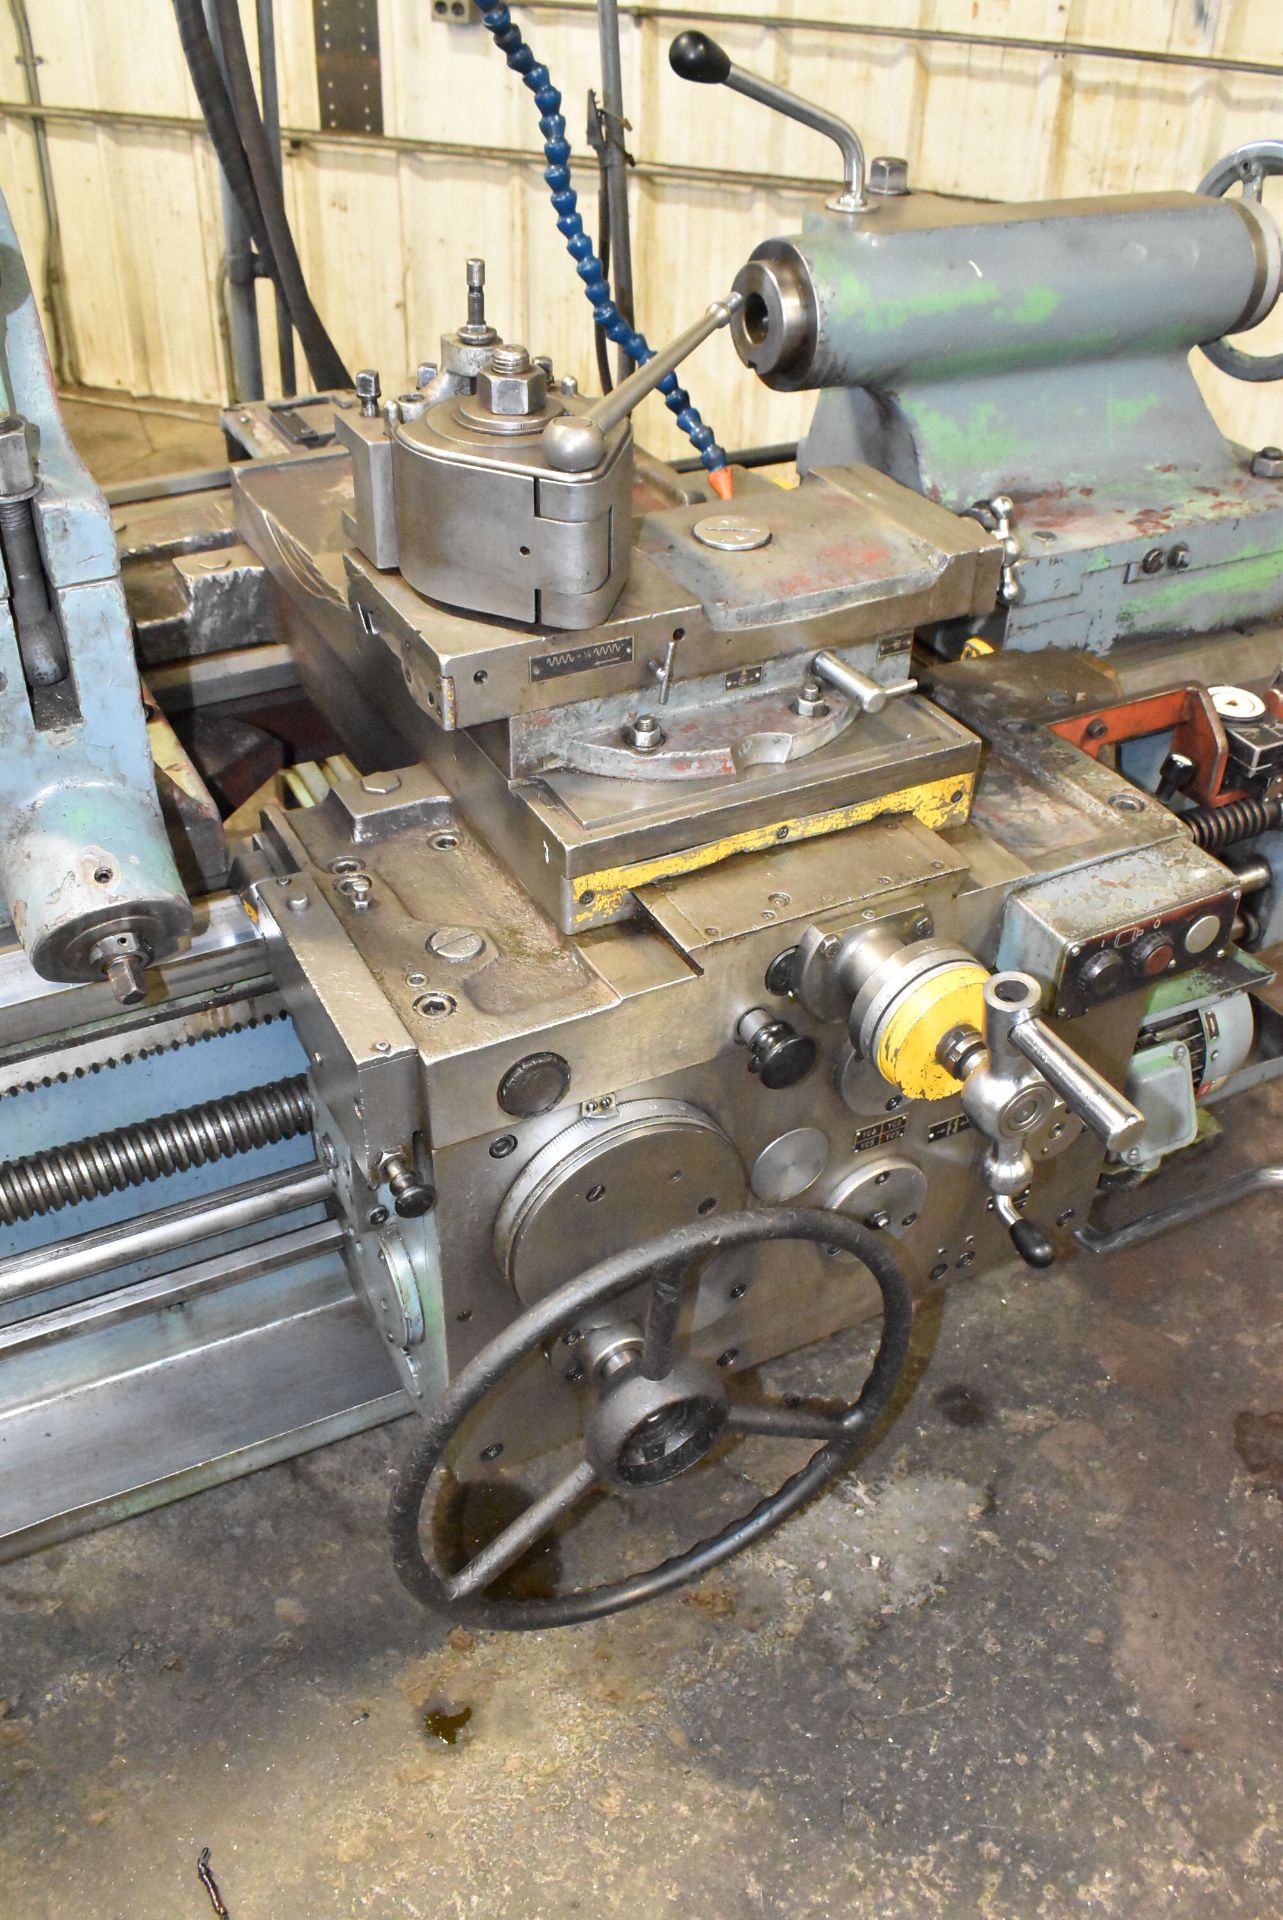 STANKO 1M63B-1 ENGINE LATHE WITH 30.5" SWING OVER BED, 62" DISTANCE BETWEEN CENTERS, 3.25" SPINDLE - Image 6 of 10